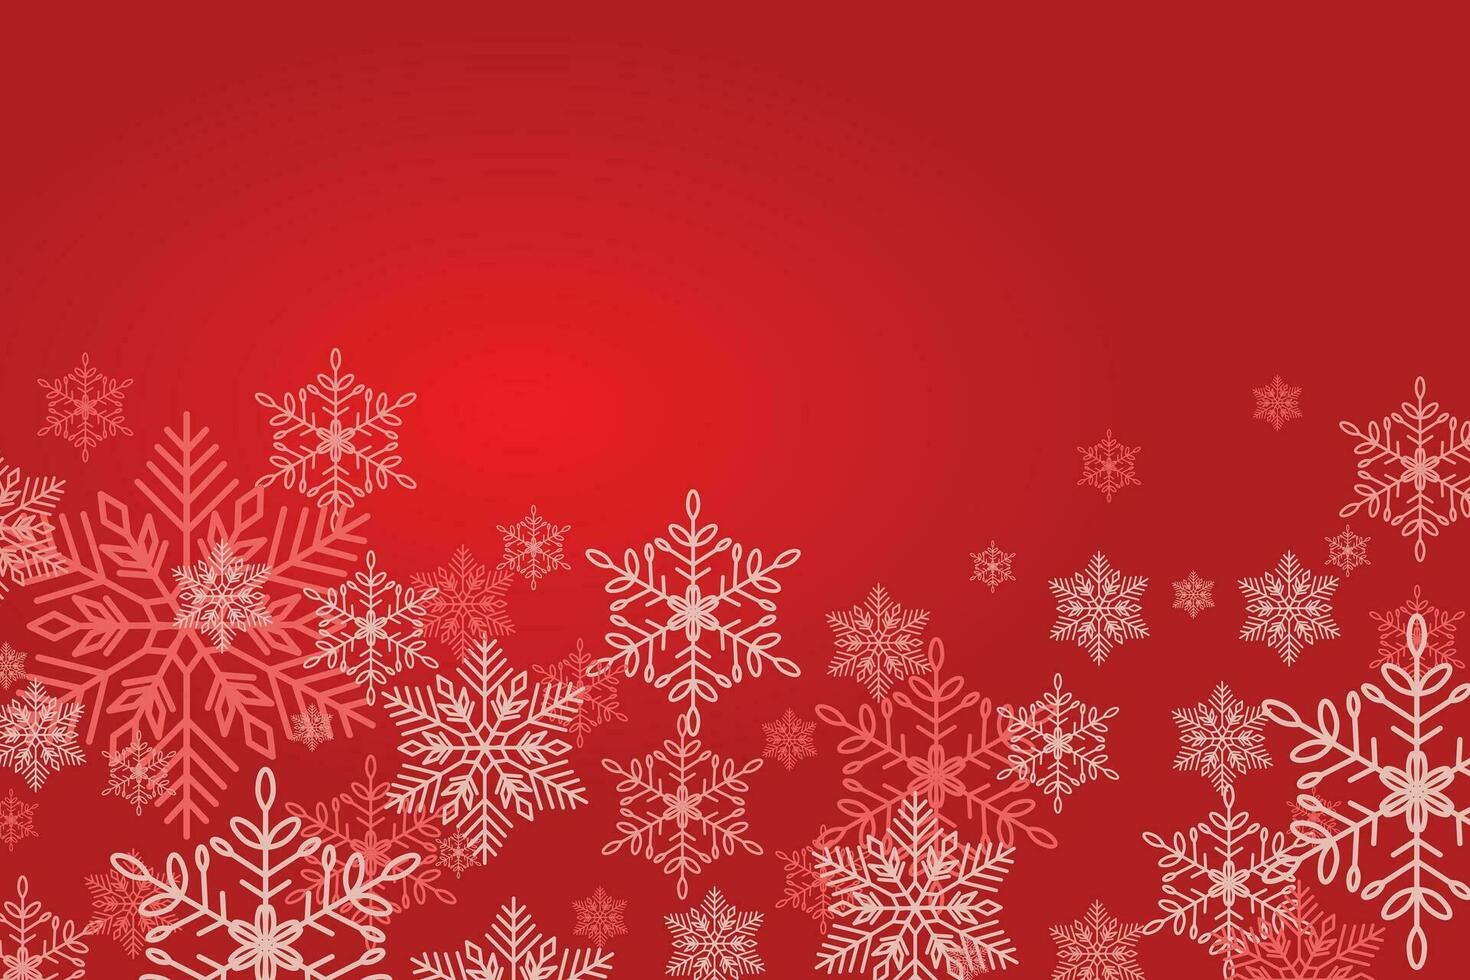 White snowflakes falling on red winter vector background. Cold weather symbols on red.